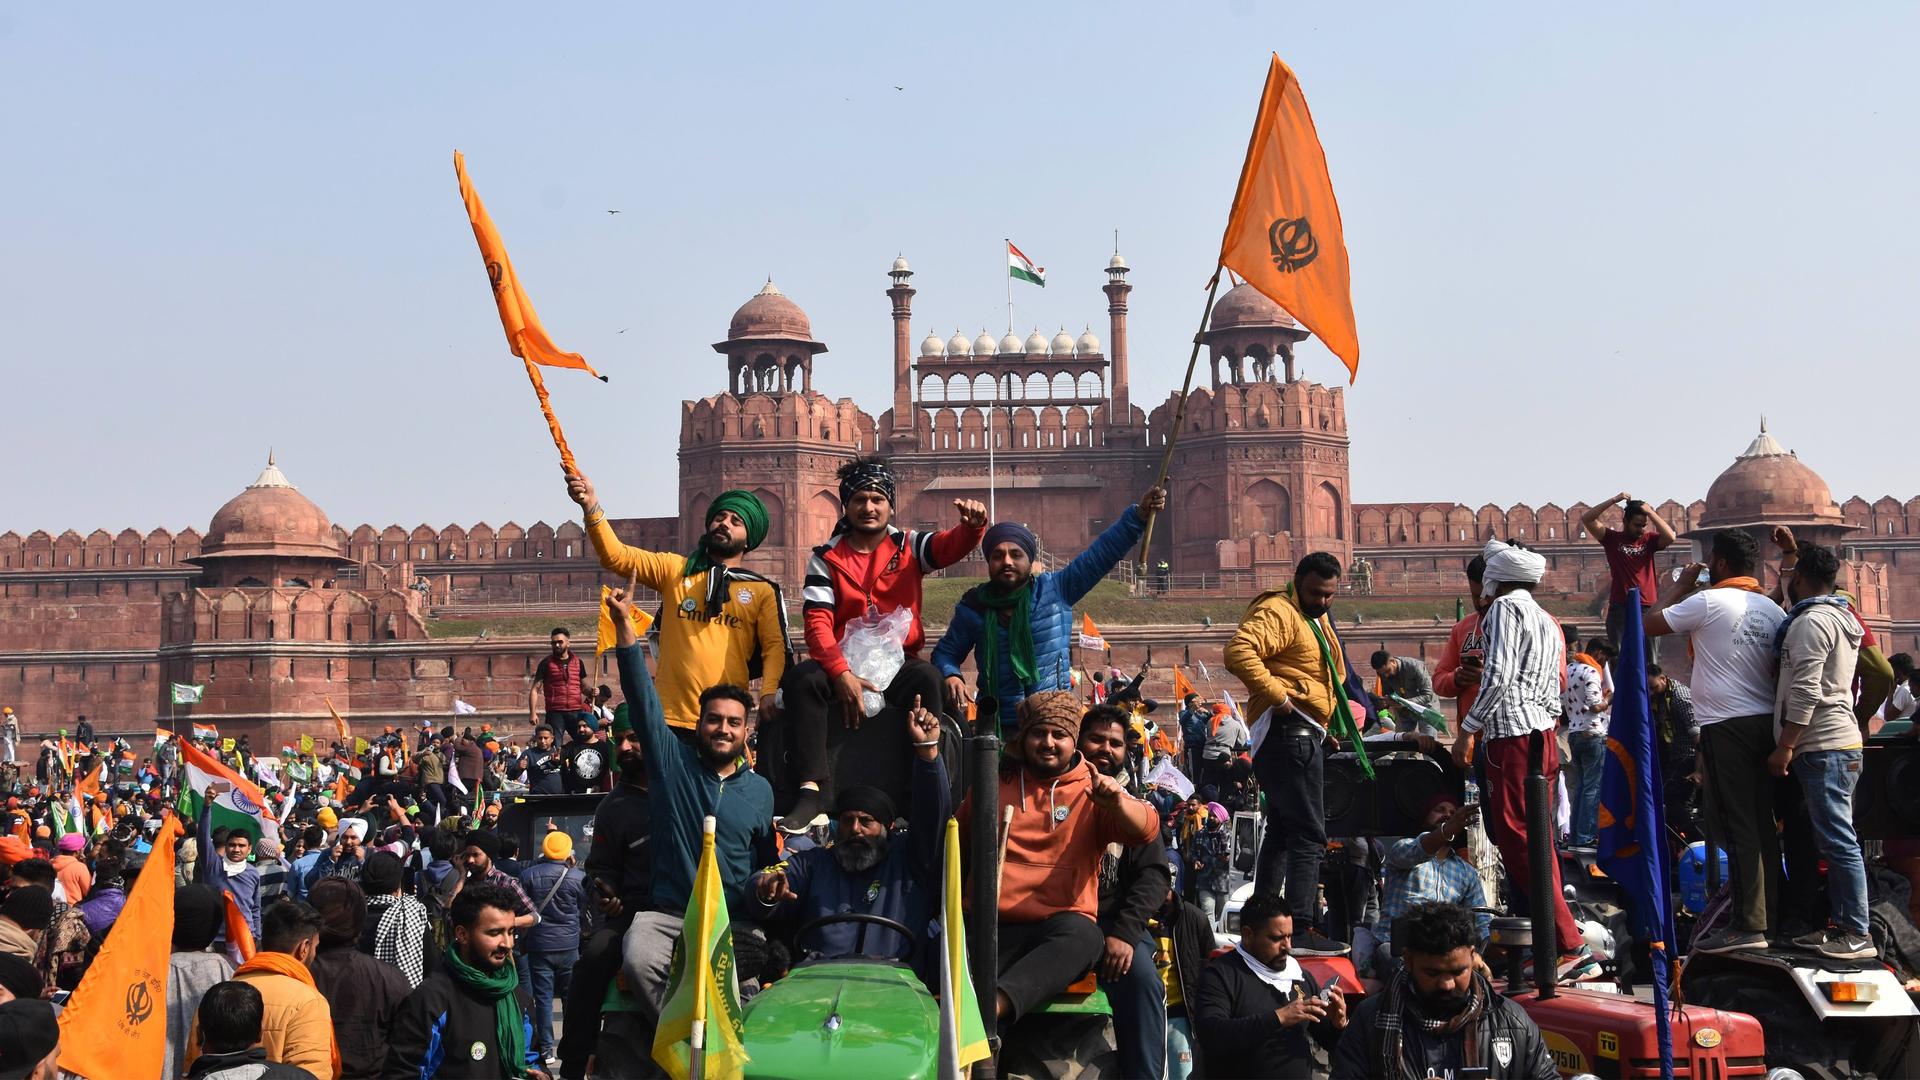 Sikhs wave the Nishan Sahib, a Sikh religious flag, as they arrive at the historic Red Fort monument in New Delhi, India, on Tuesday, Jan. 26, 2021.  